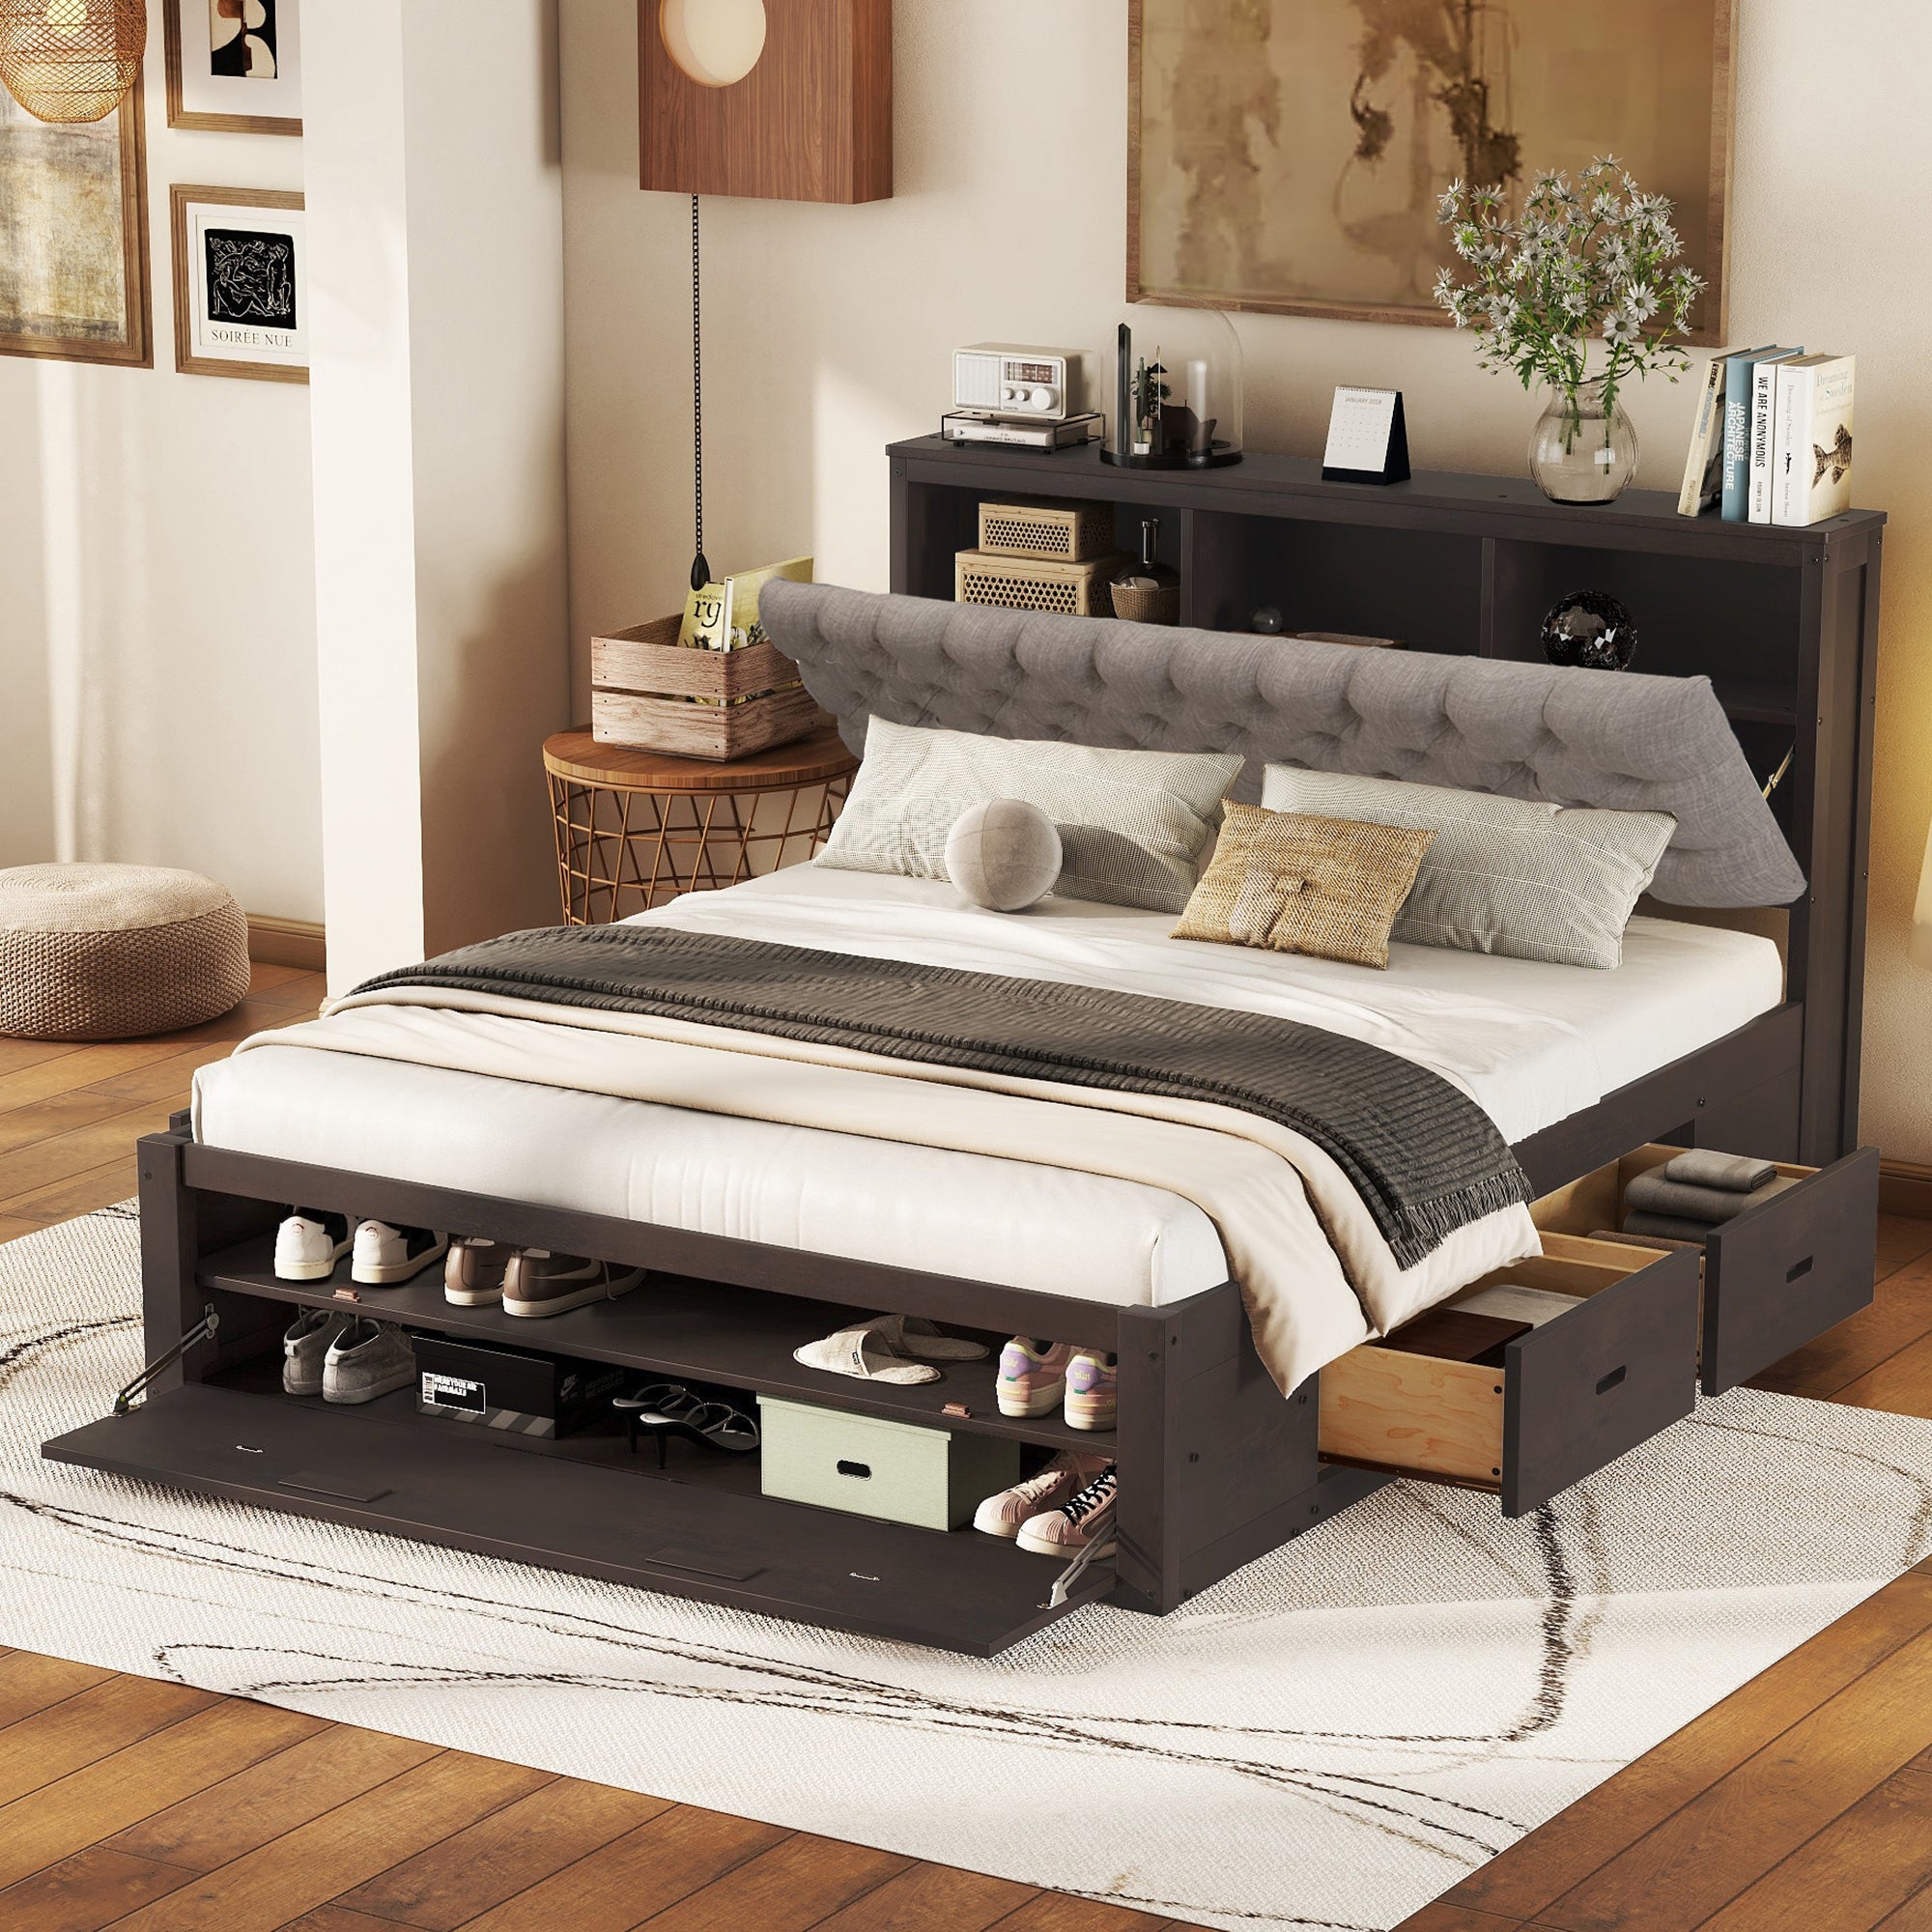 🆓🚛 Wood Queen Size Platform Bed with Storage Headboard, shoe rack and 4 drawers, Espresso